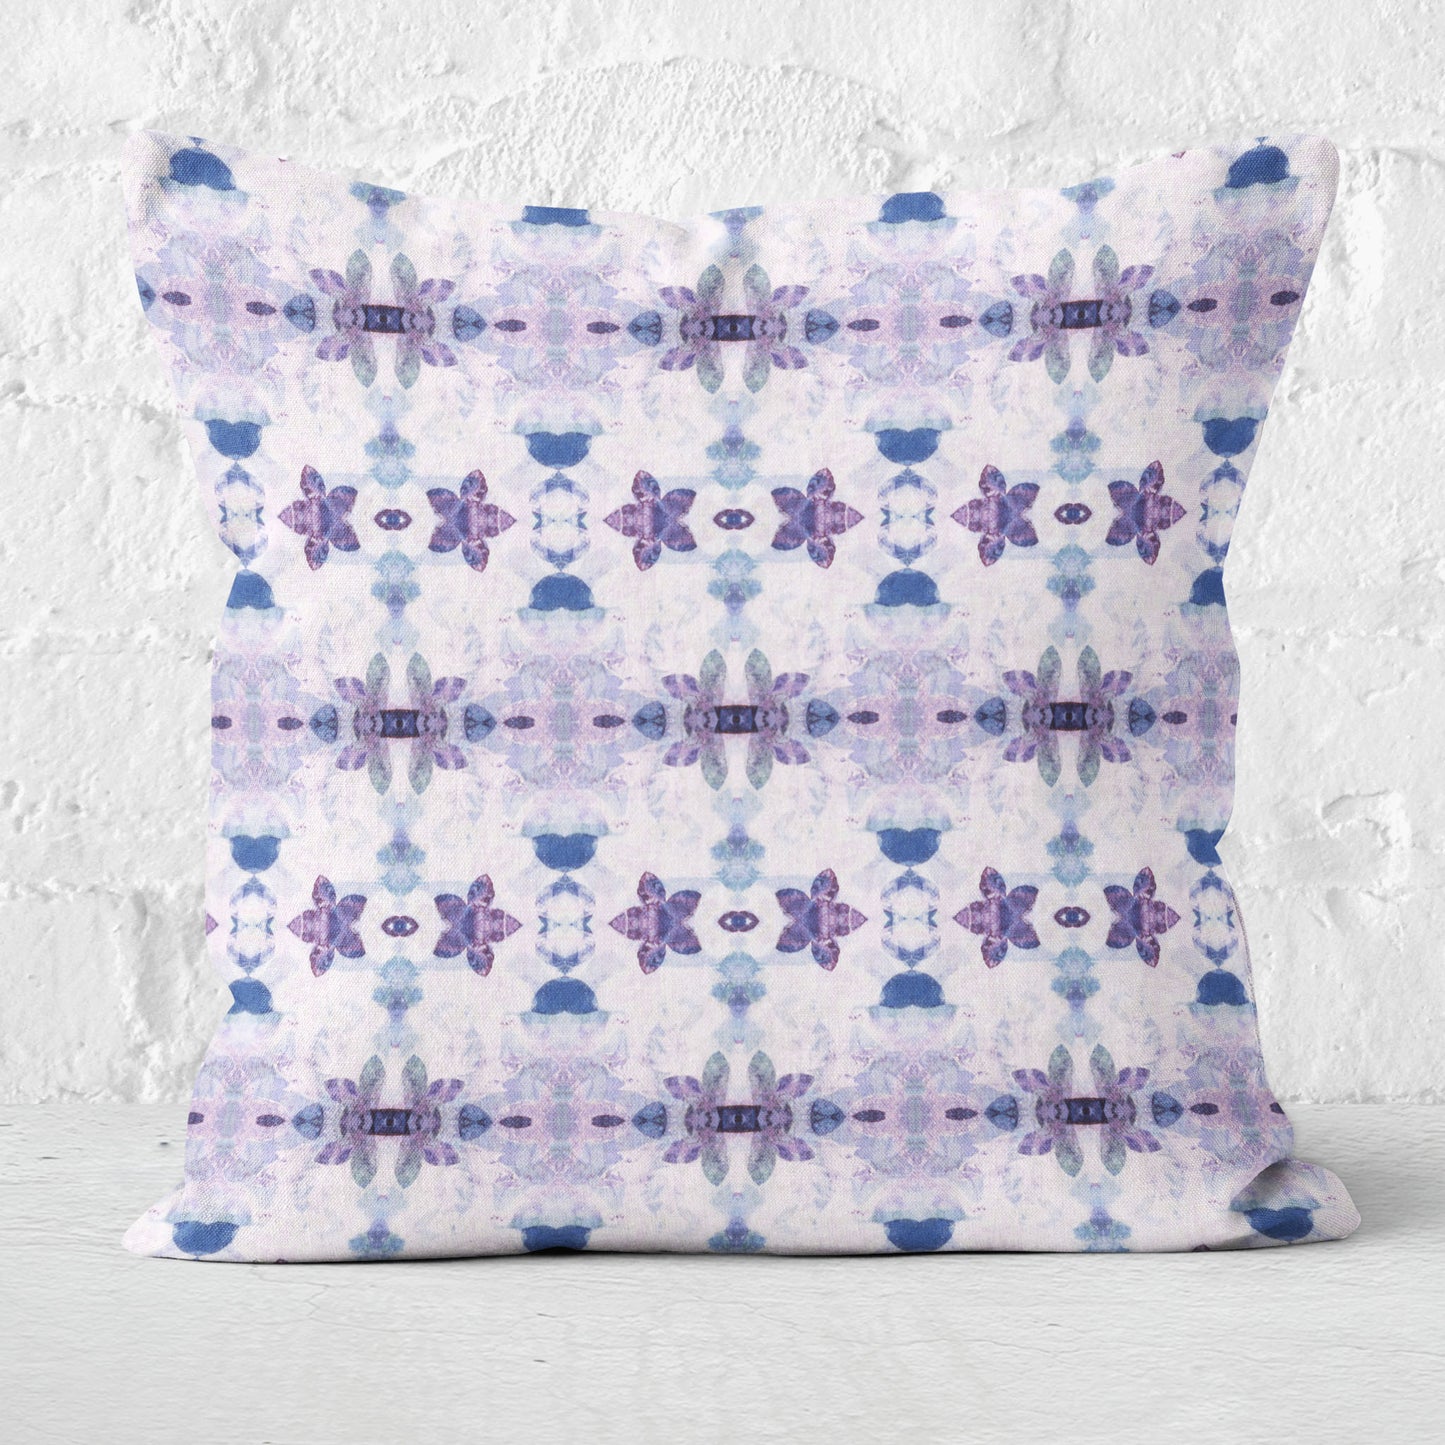 Square throw pillow featuring a purple and blue floral pattern on a white brick background